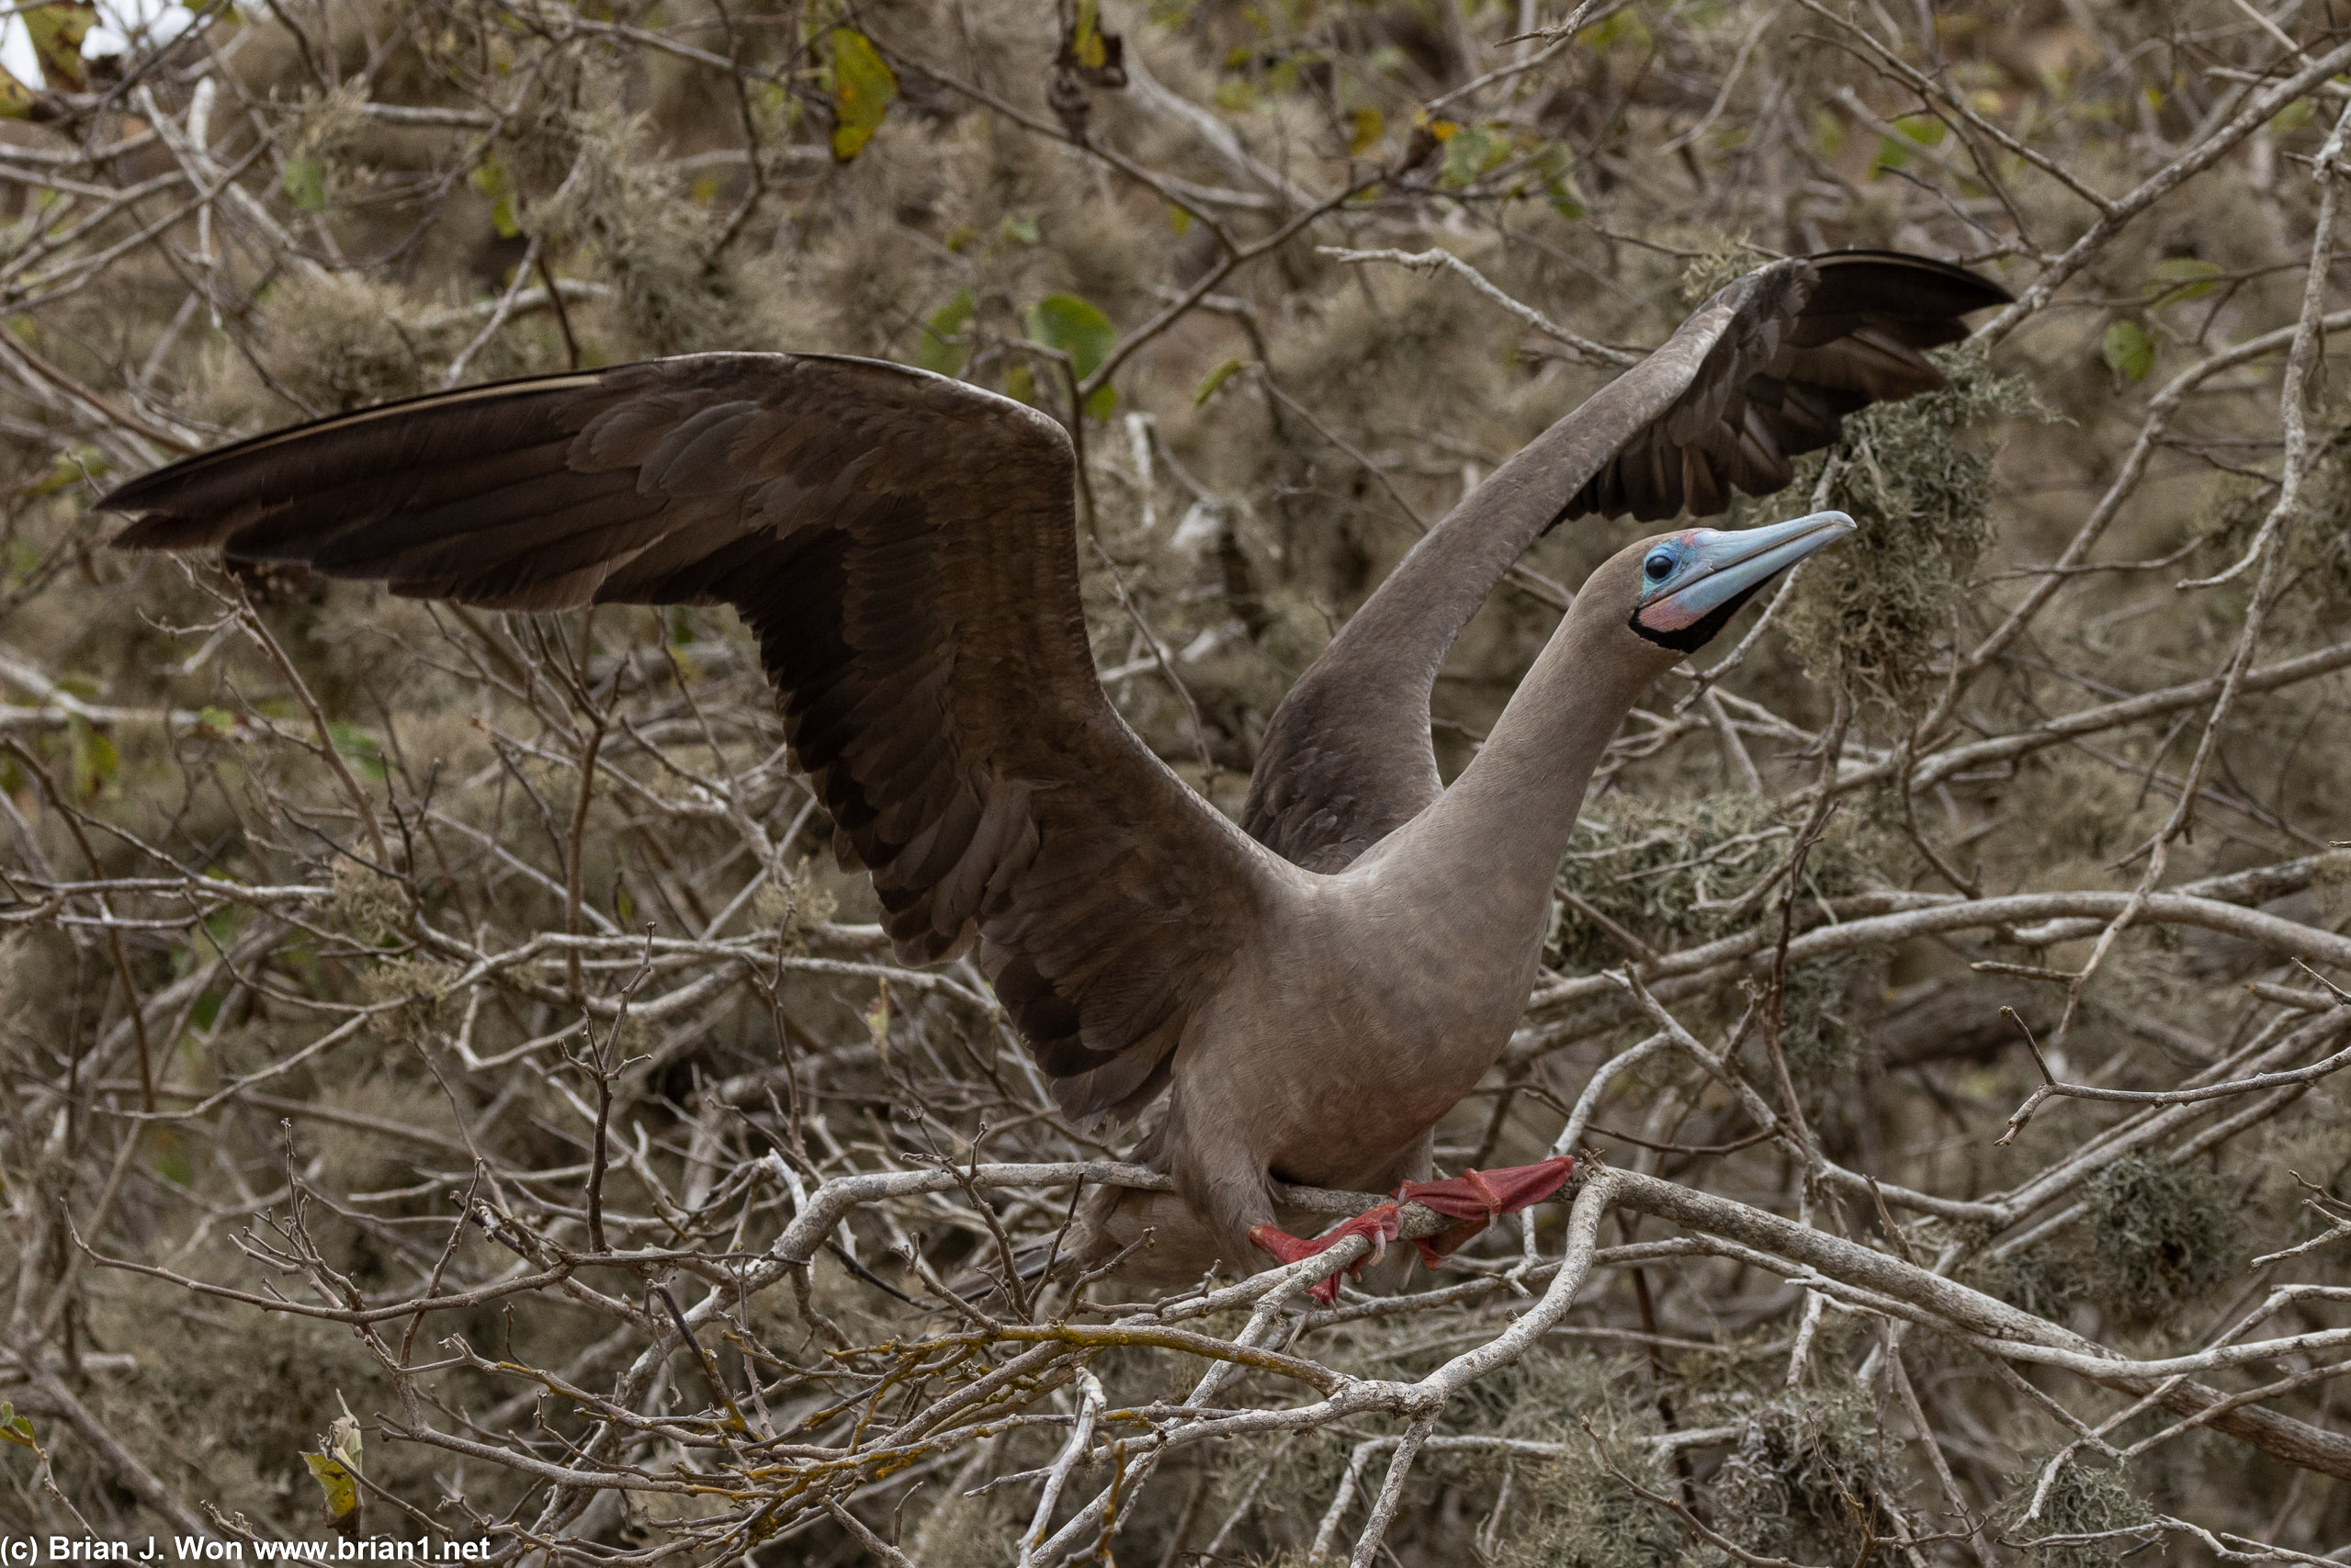 Red-footed booby landing in a tree.